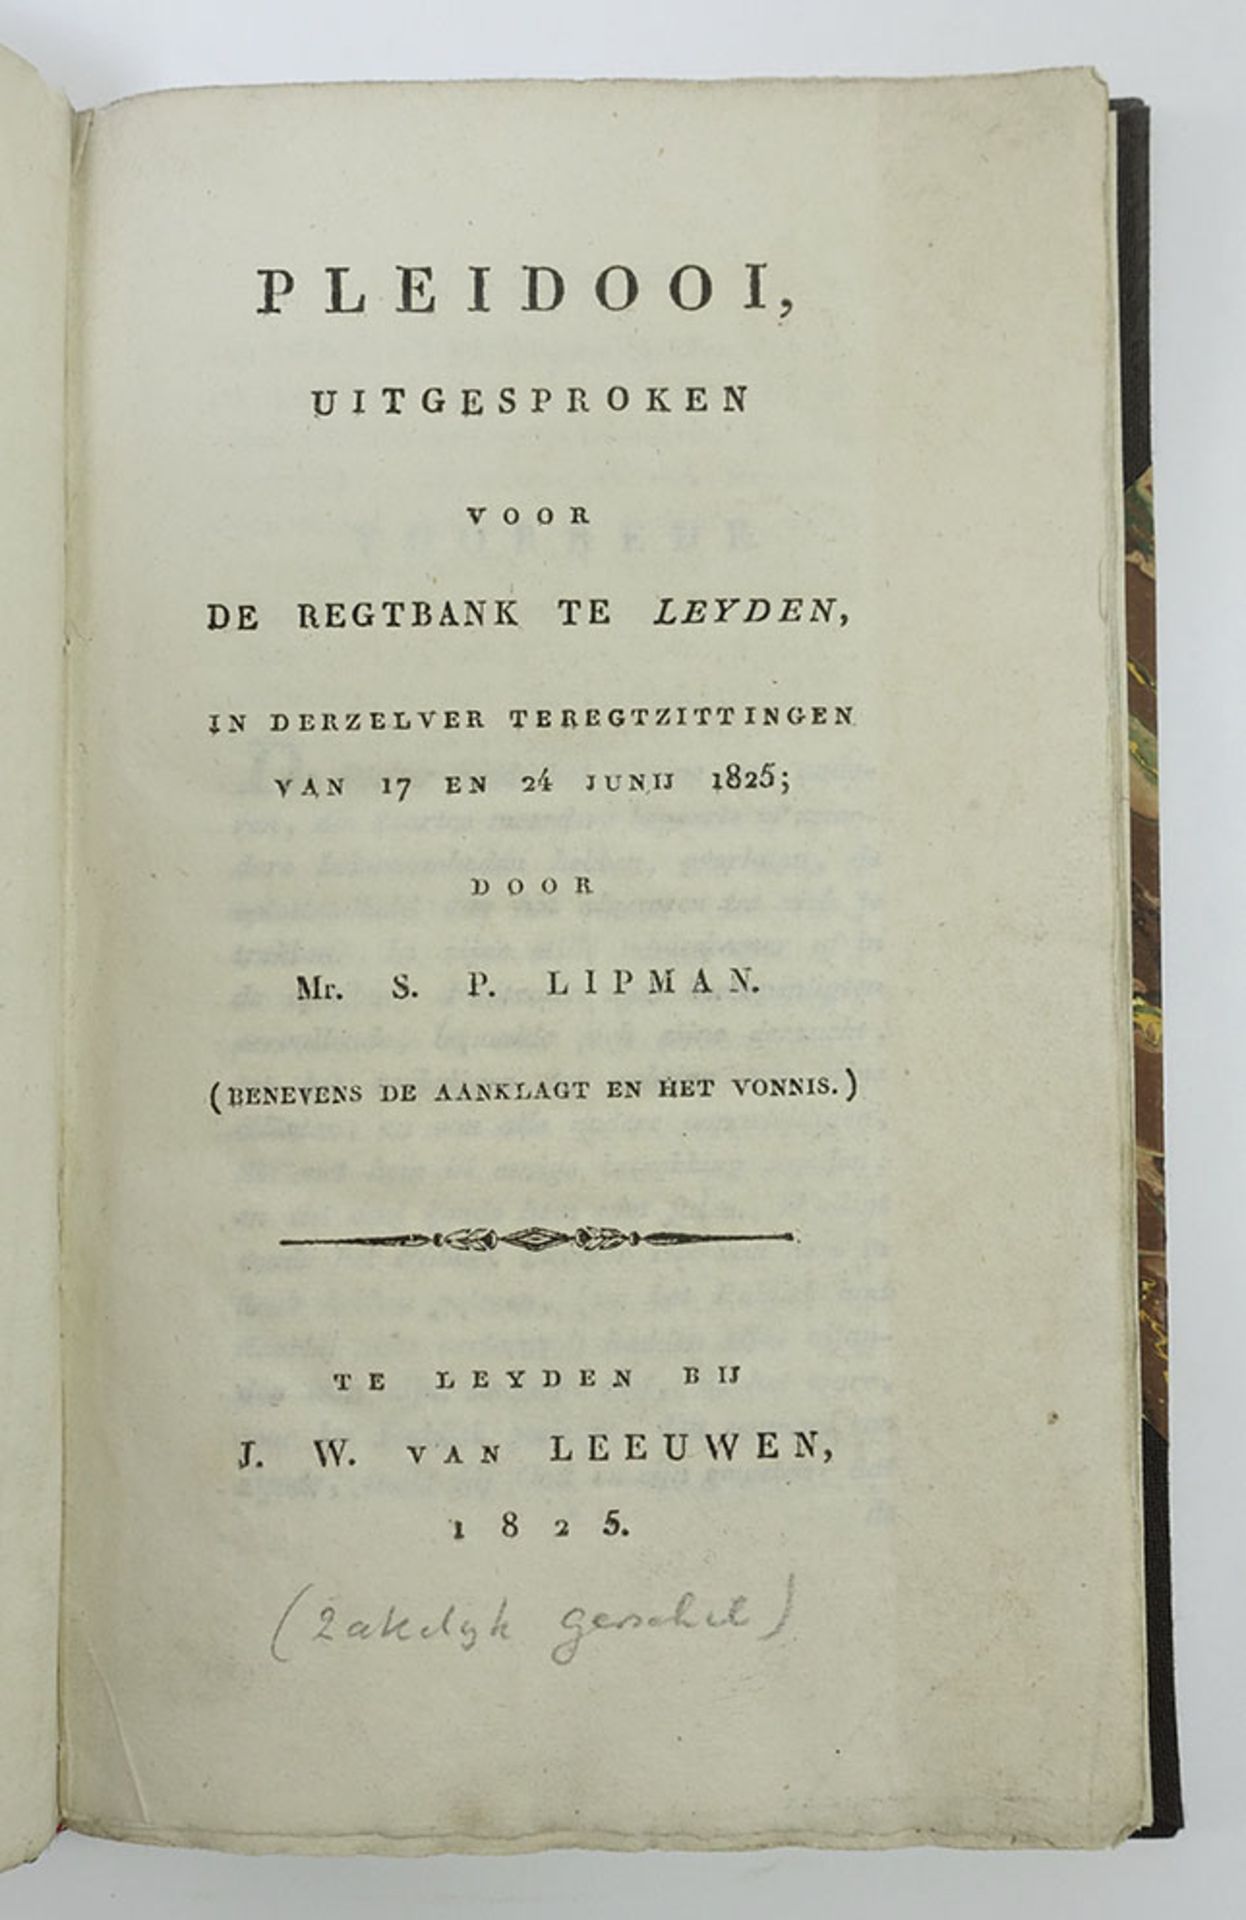 LEIDEN -- COLLECTION of 57 ordinances, pamphlets, decrees, instructions, a.o. small publications on